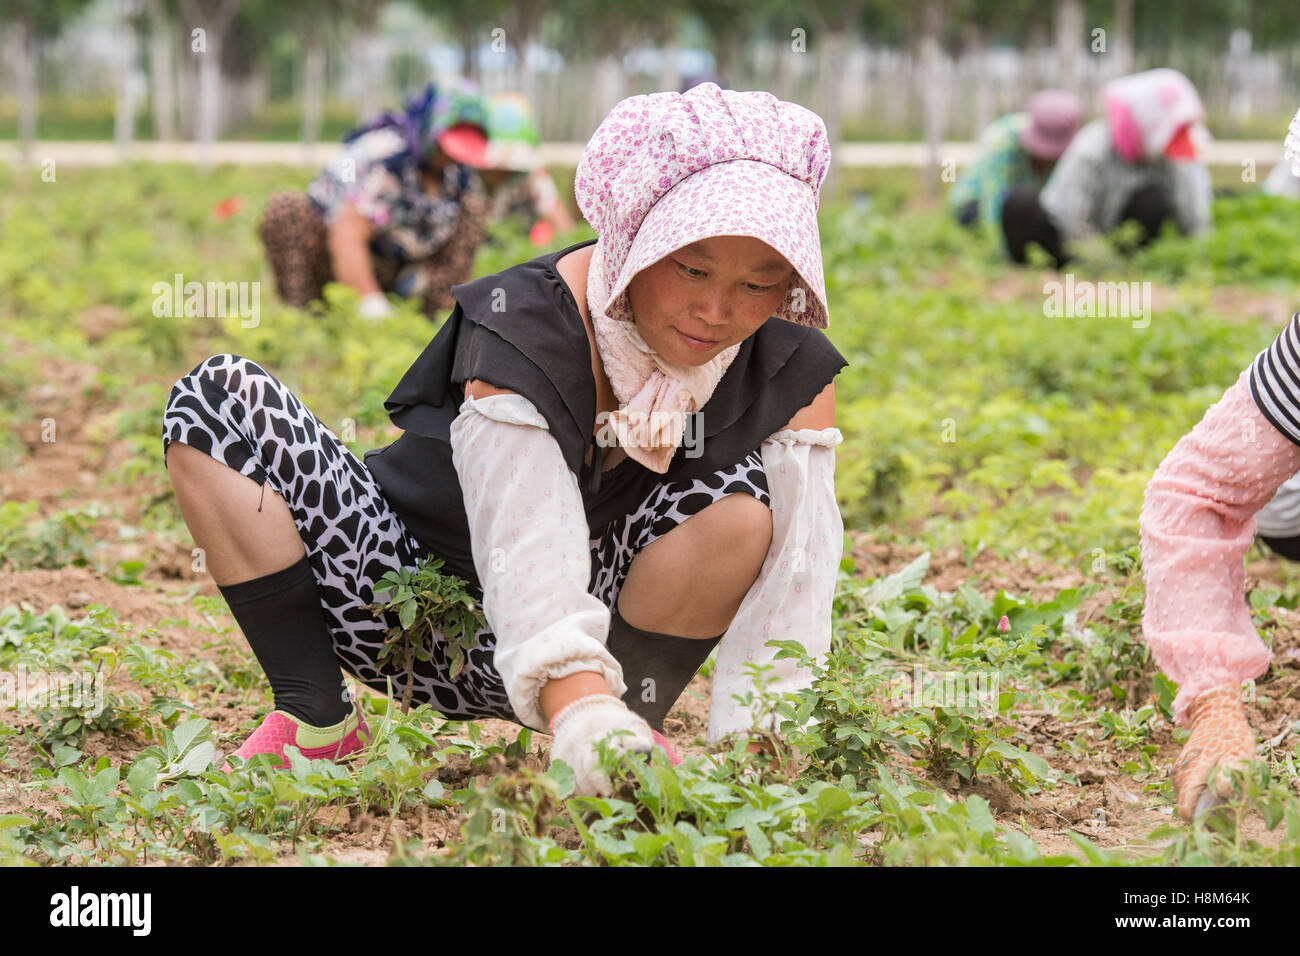 Beijing, China - Chinese female workers weeding a field on a farm near Beijing, China. Stock Photo